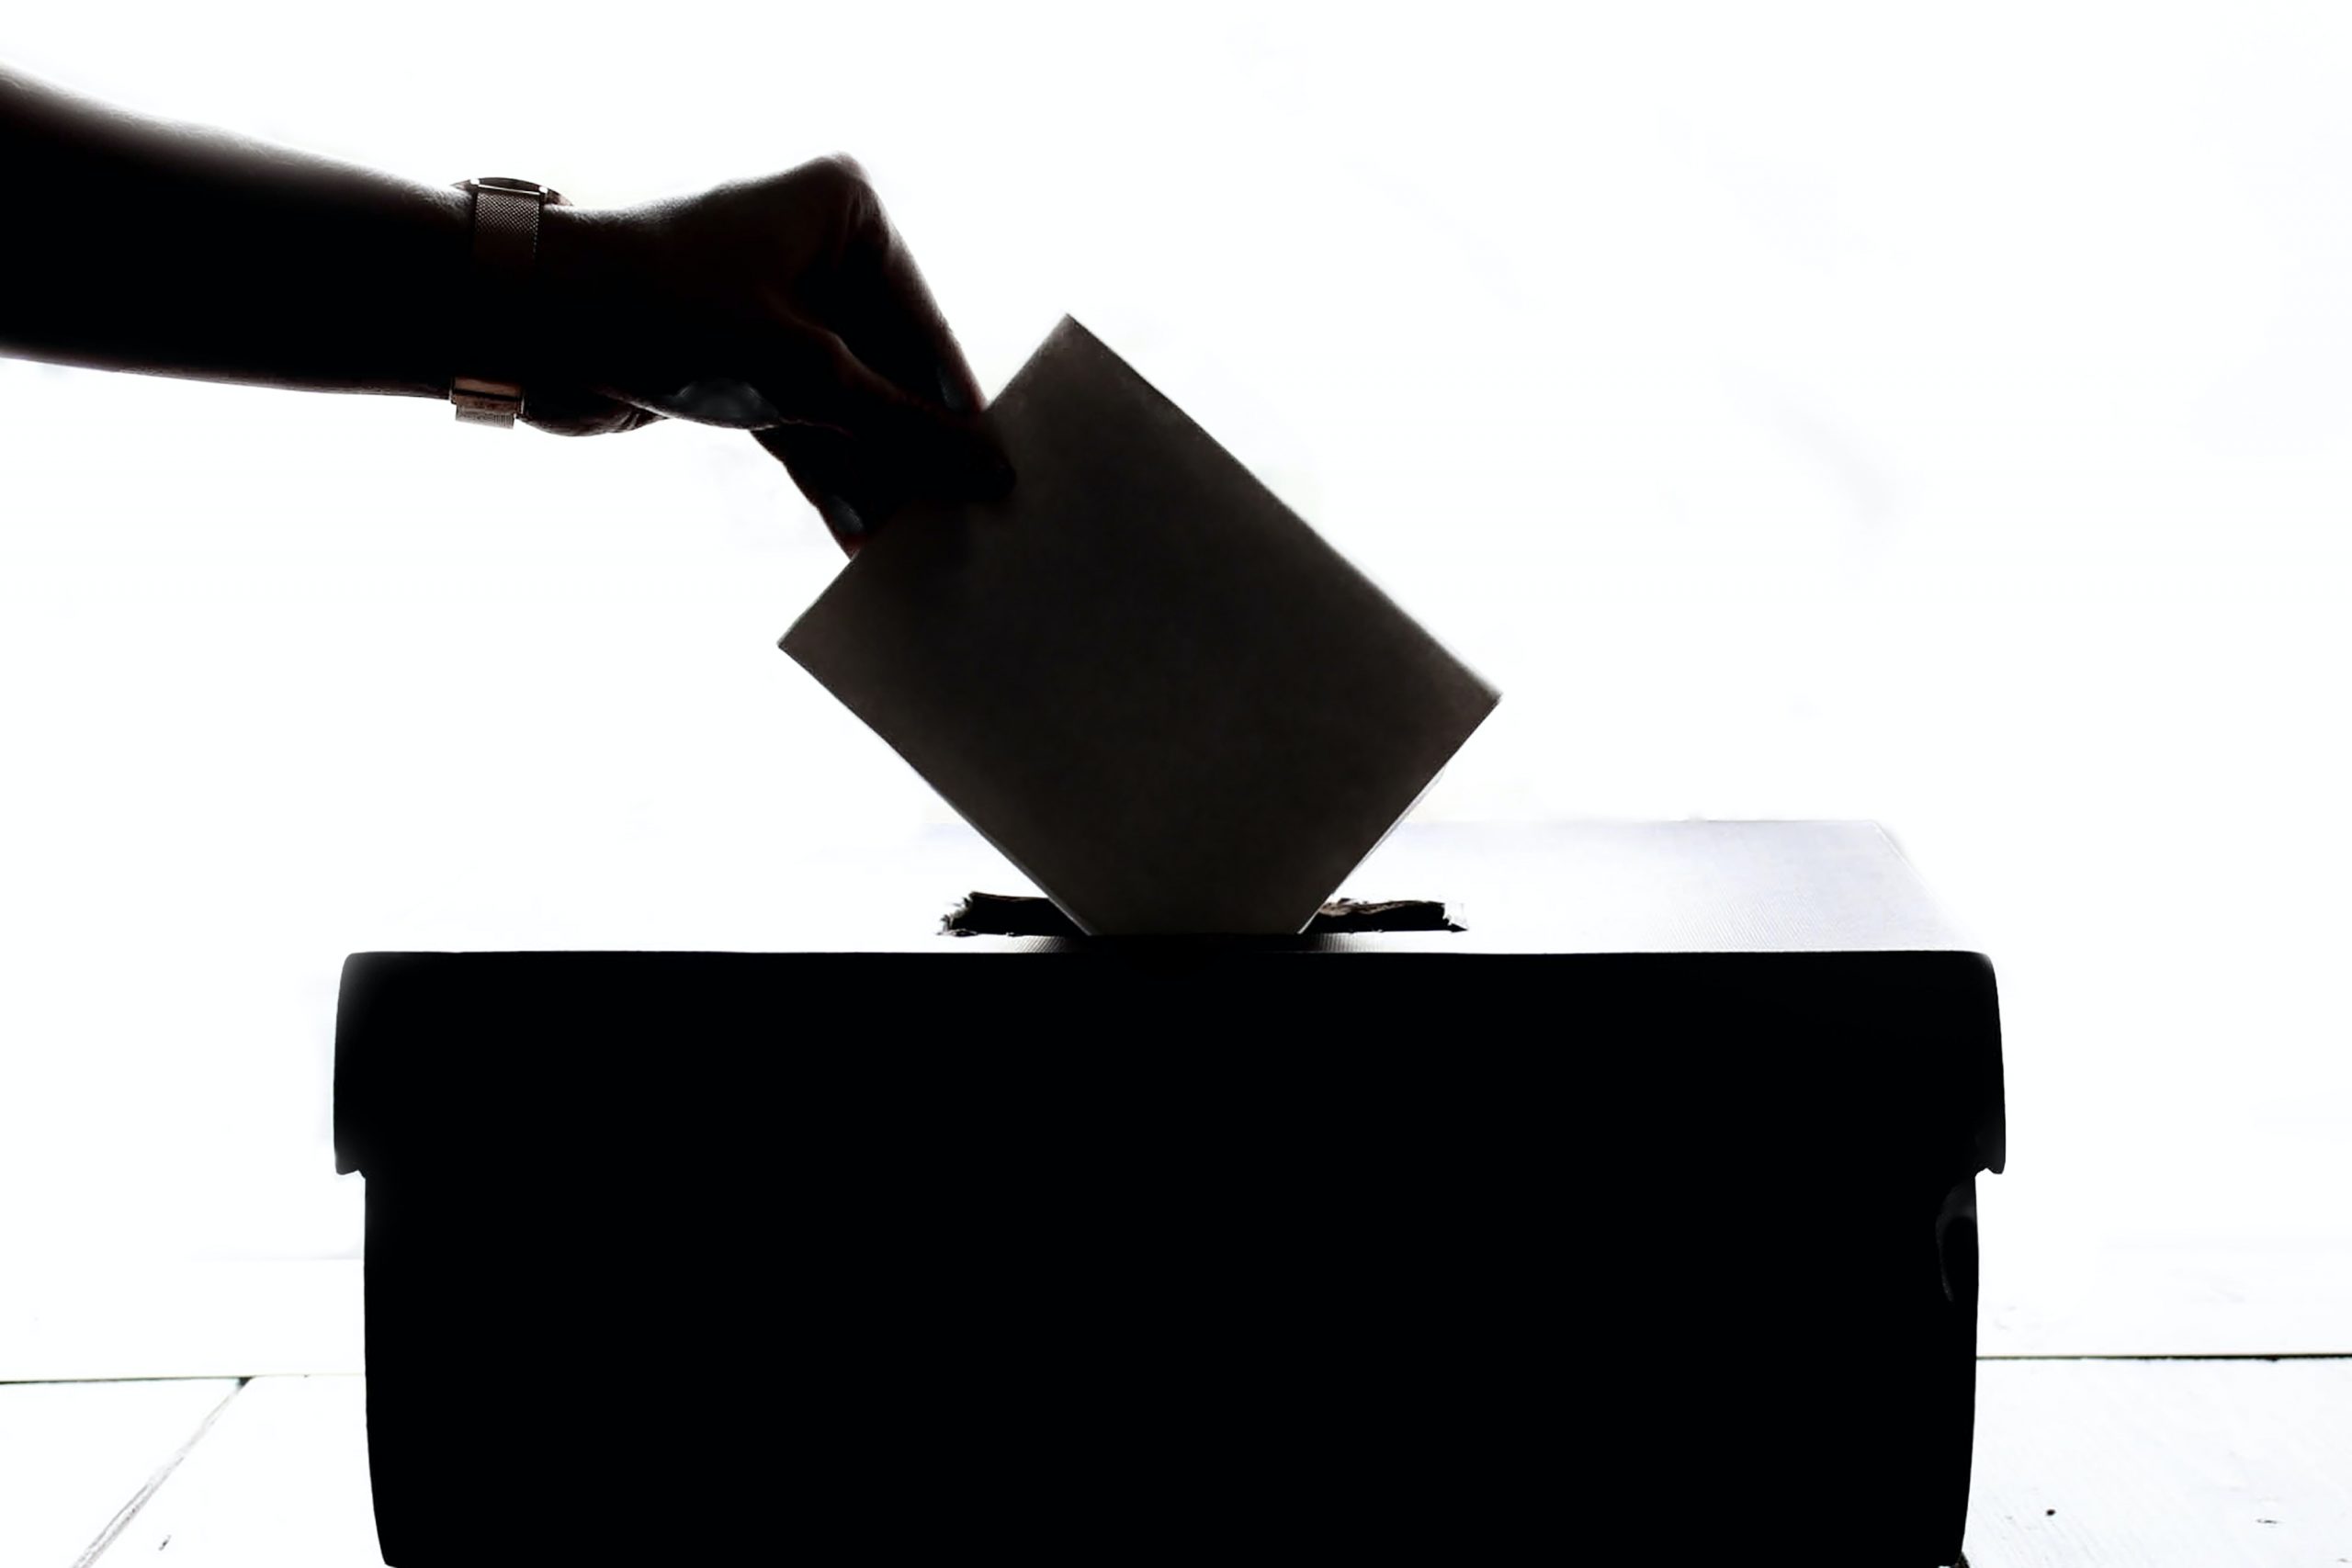 Silhouetted hand casting a Colorado ballot into a voting box, keeping an eye on democracy.